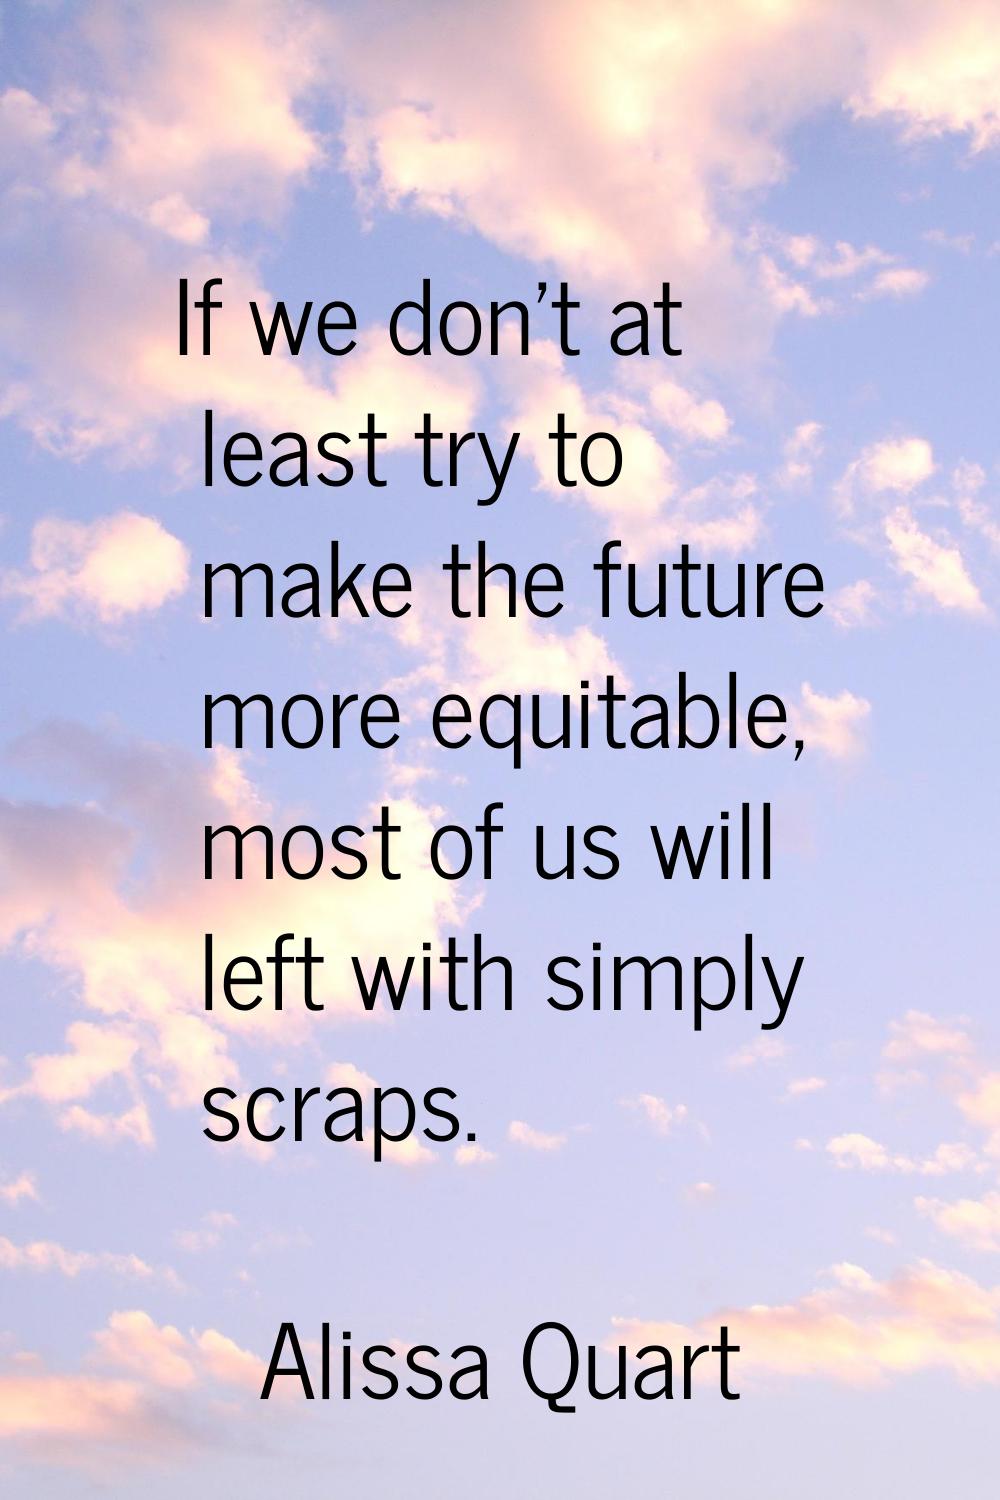 If we don't at least try to make the future more equitable, most of us will left with simply scraps